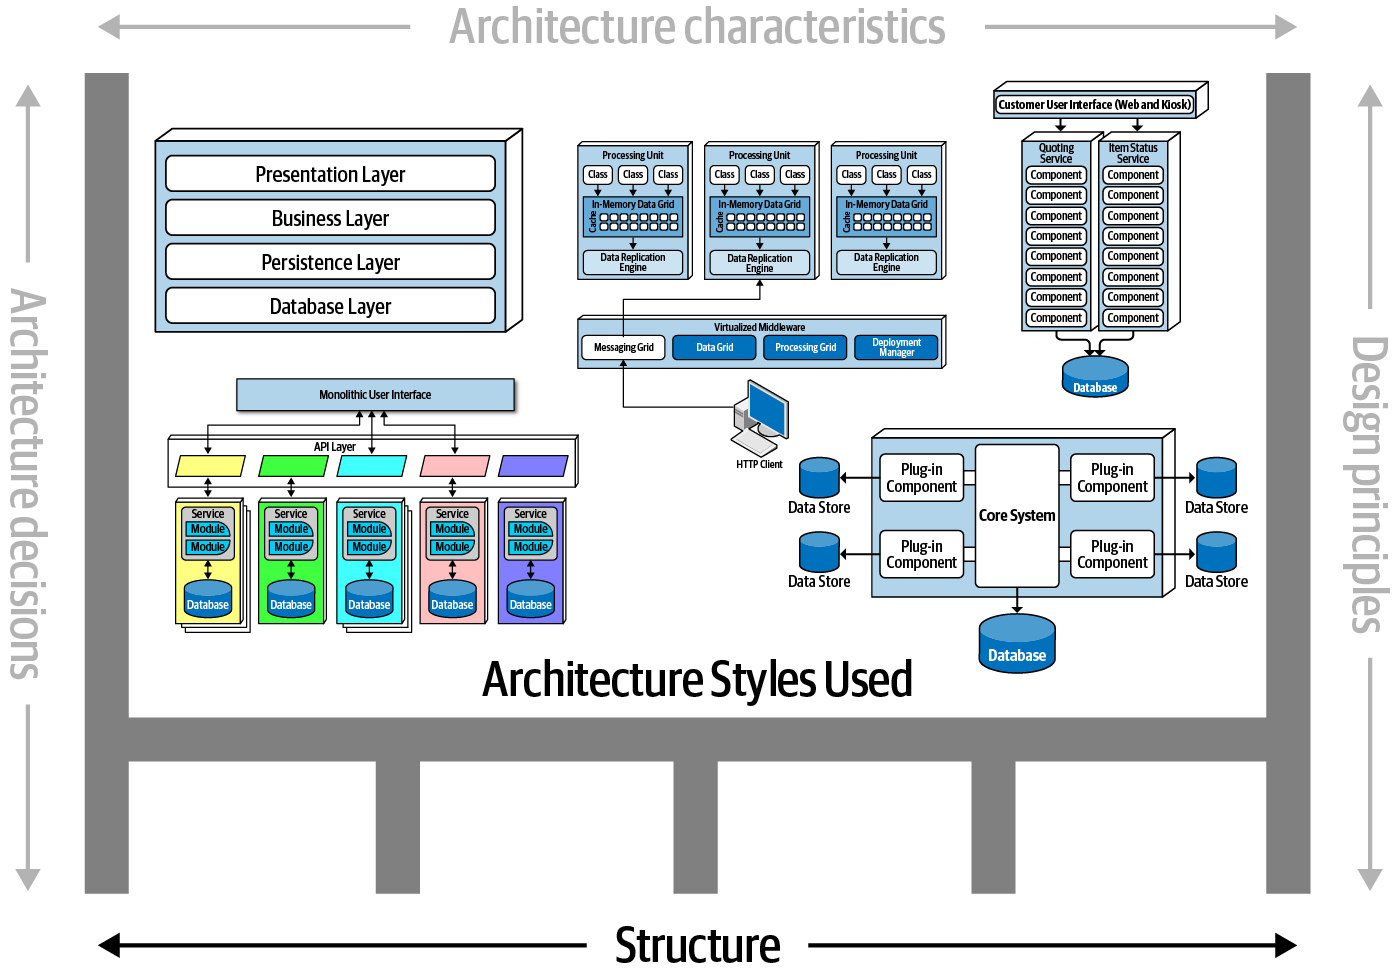 Structure refers to the type of architecture styles used in the system